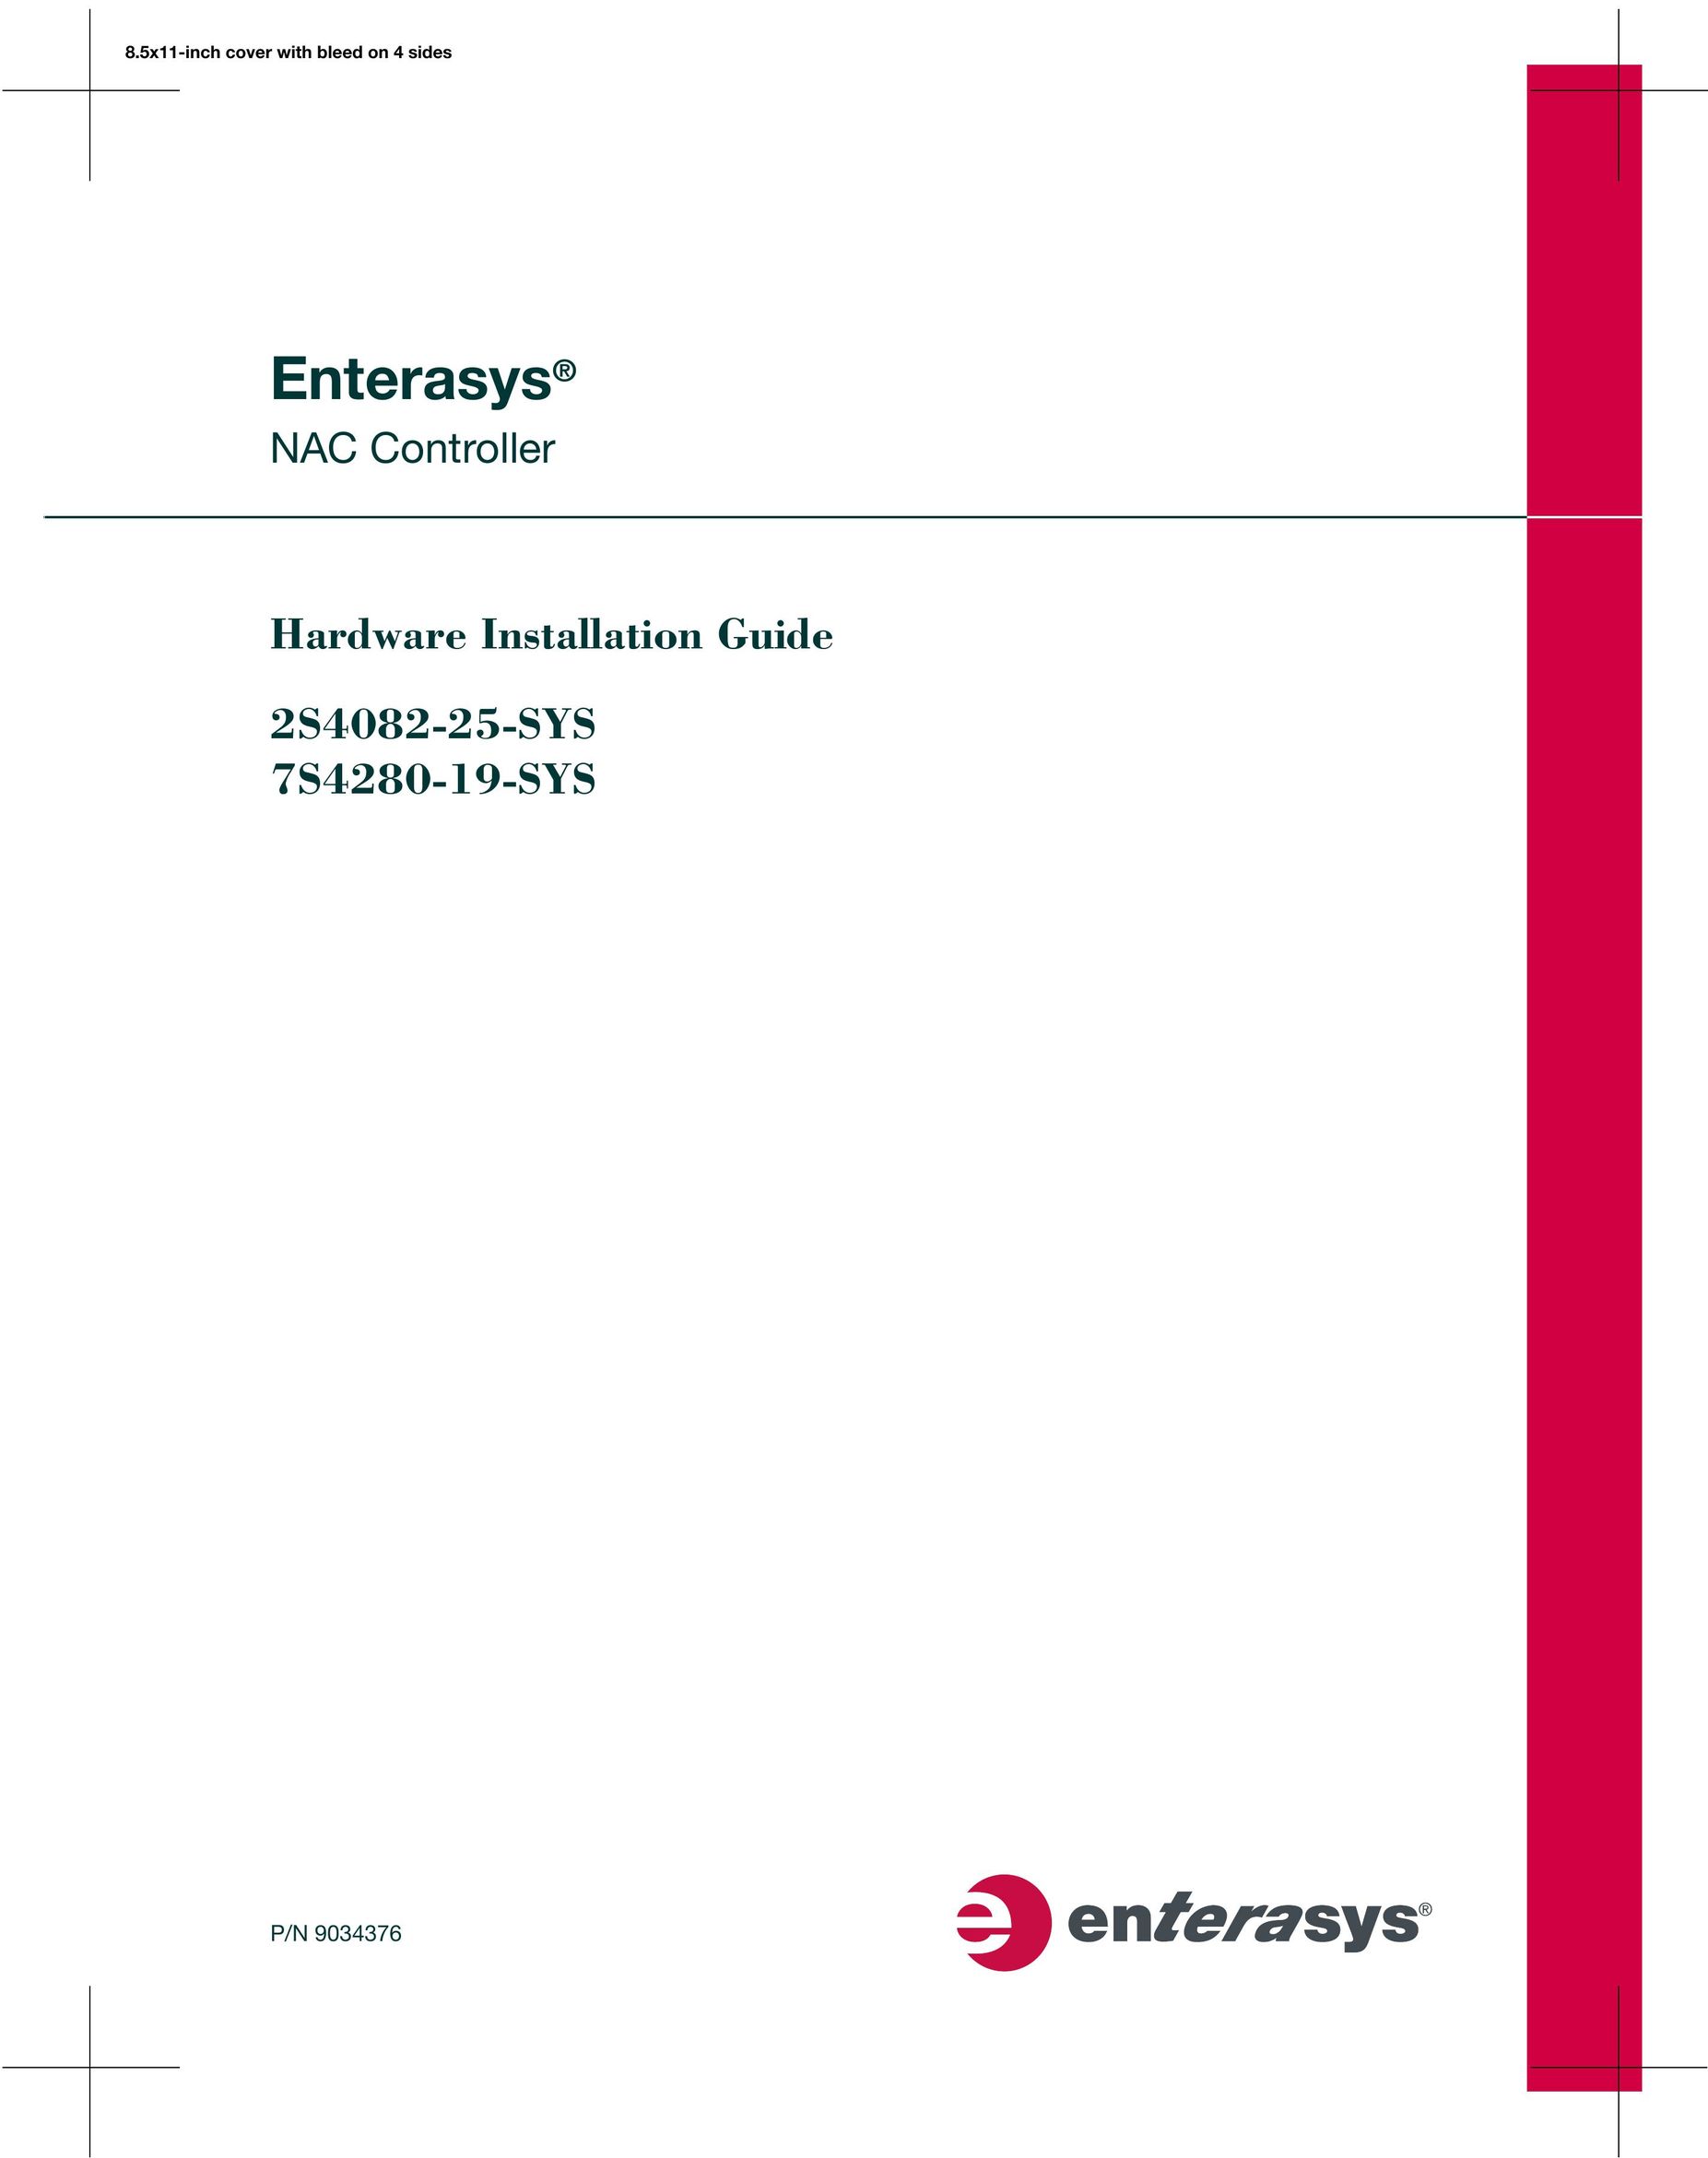 Enterasys Networks 7S4280-19-SYS Computer Hardware User Manual